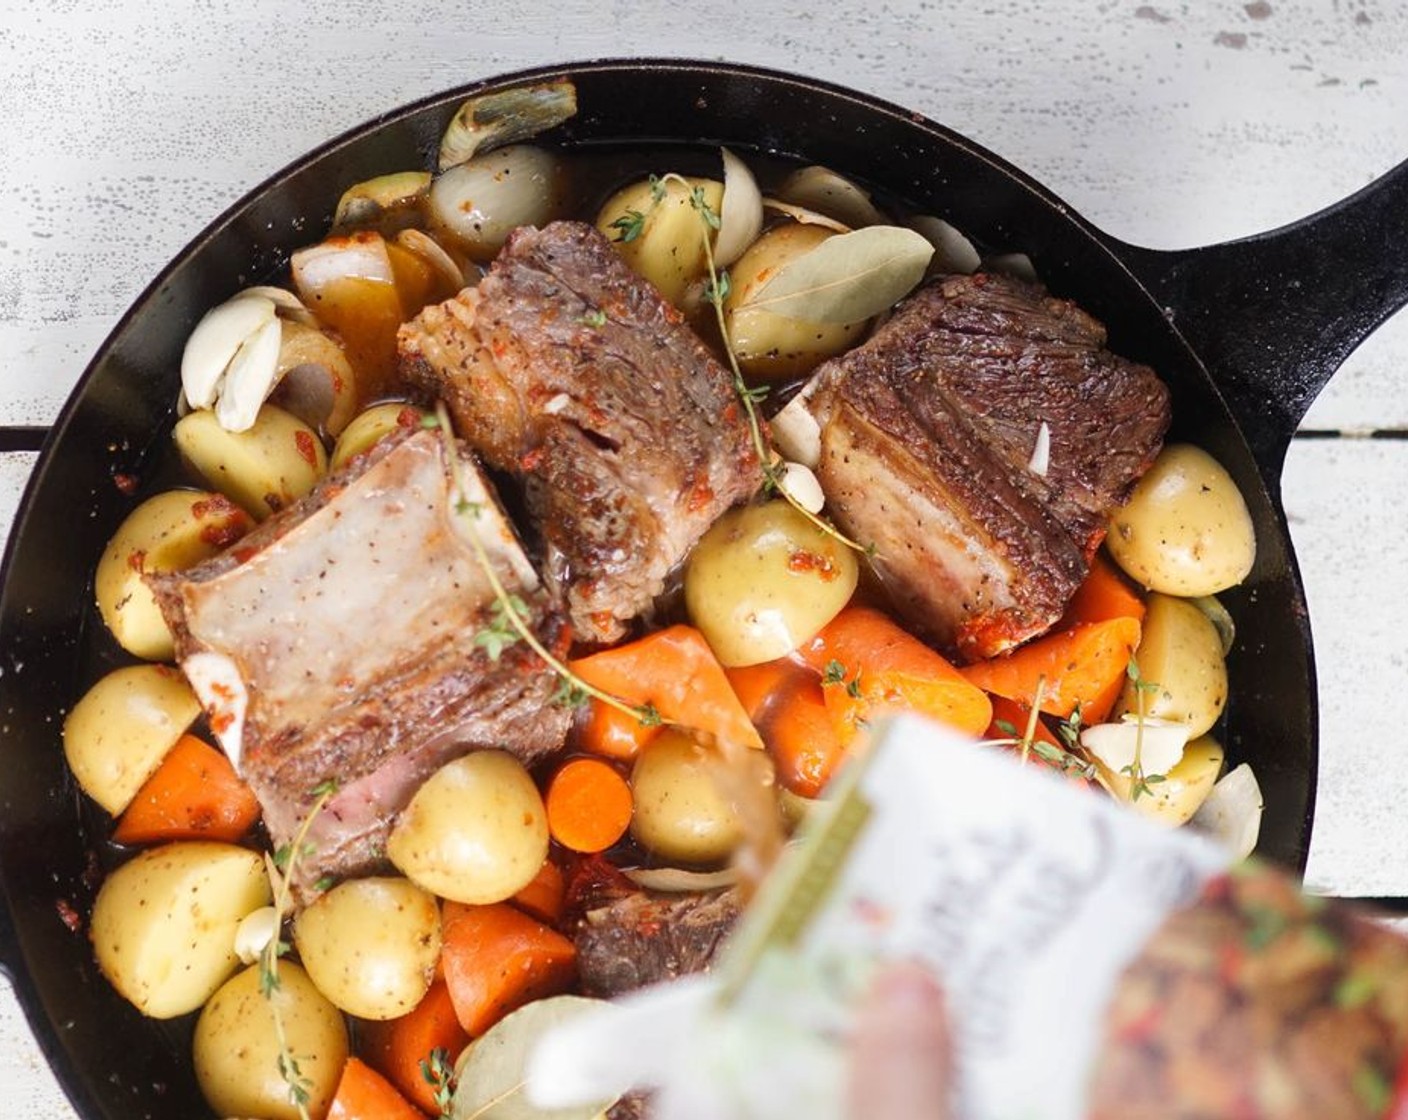 step 6 Add Low-Sodium Beef Broth (2 cups) until the vegetables and short ribs are just about, but not fully, submerged. Add the Fresh Thyme (3 sprigs) and Bay Leaves (2). Bring to a boil and boil for 2 minutes.